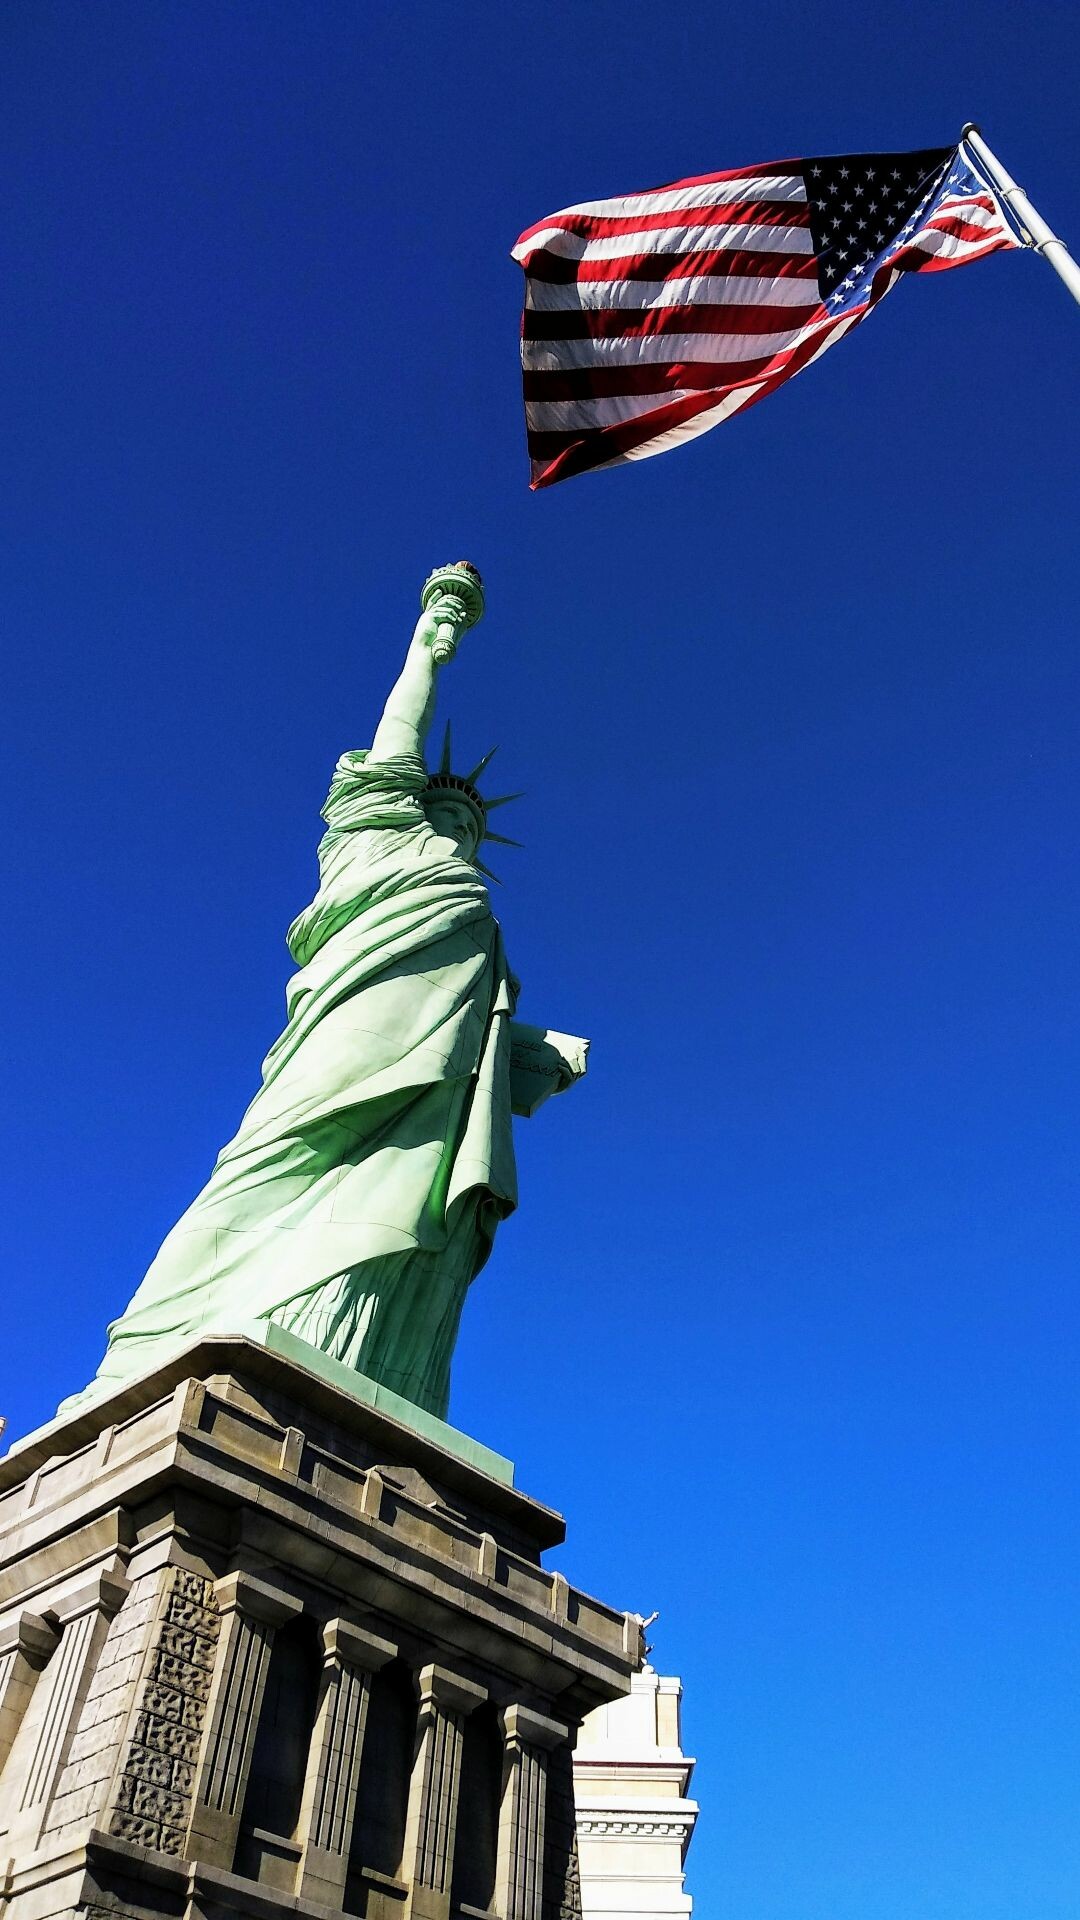 Statue of Liberty: The statue's crown bears seven spikes, symbolizing the seven oceans and seven continents of the world, and emphasizing her message of welcome, inclusiveness, and freedom. 1080x1920 Full HD Background.